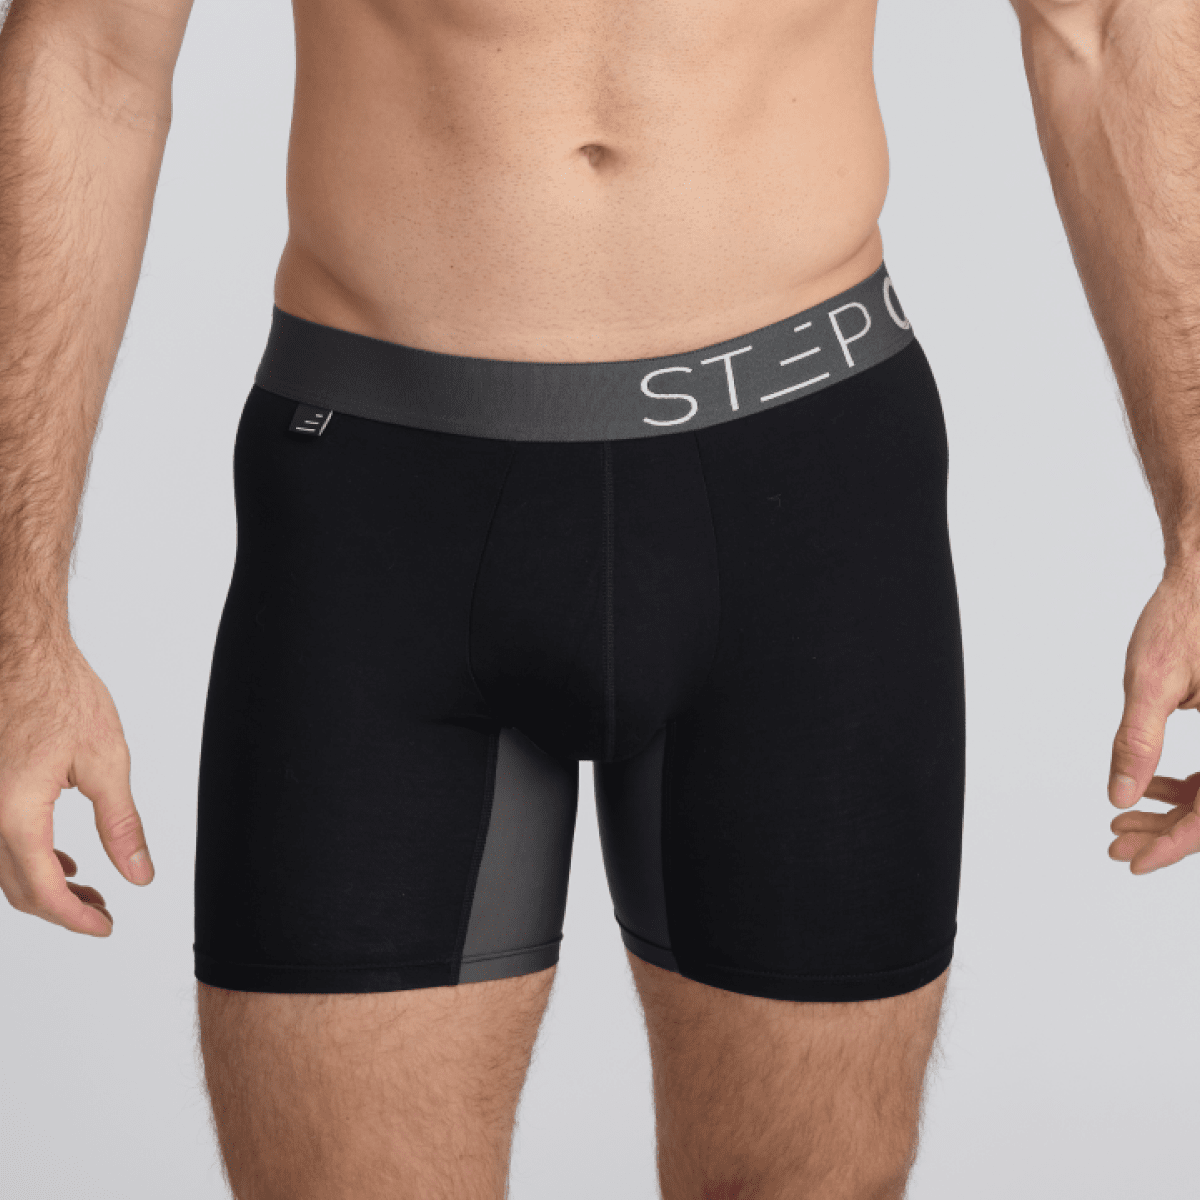 Men's Bamboo Underwear Boxers in black and grey